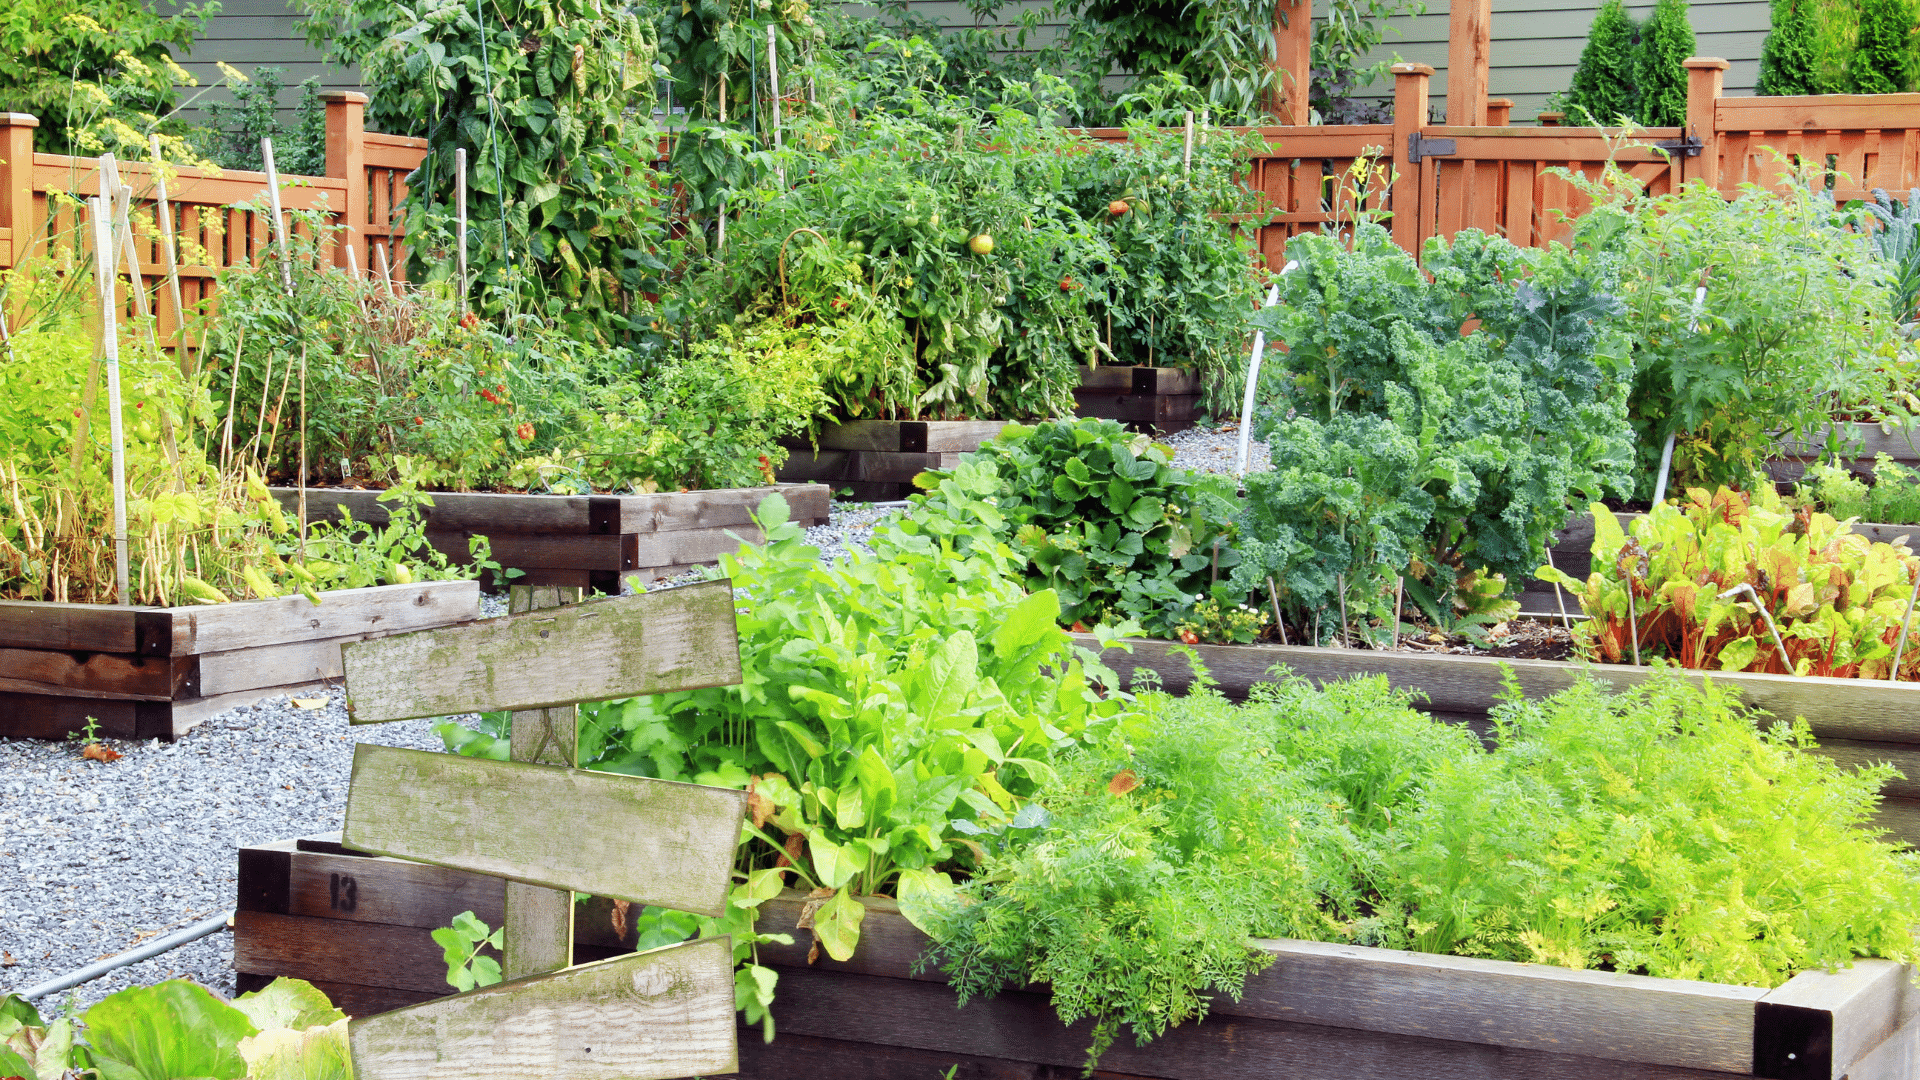 8 Vegetables and Herbs for Beginning Gardeners (4)